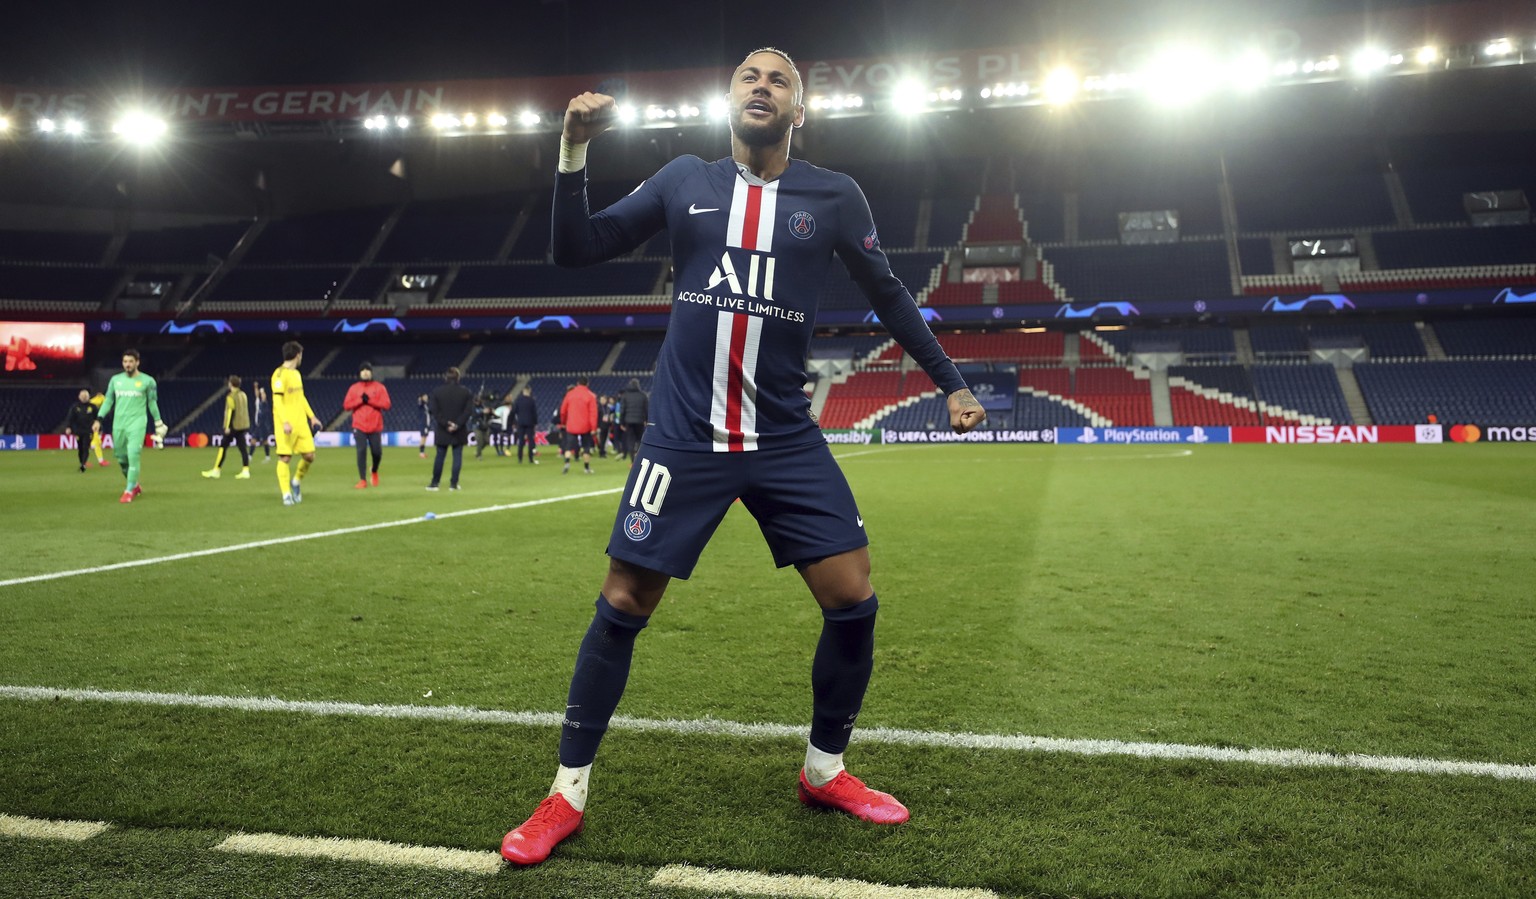 Paris Saint Germain&#039;s Neymar celebrates after the Champions League round of 16 second leg soccer match between PSG and Borussia Dortmund, Wednesday March 11, 2020 in Paris. The match is being pla ...